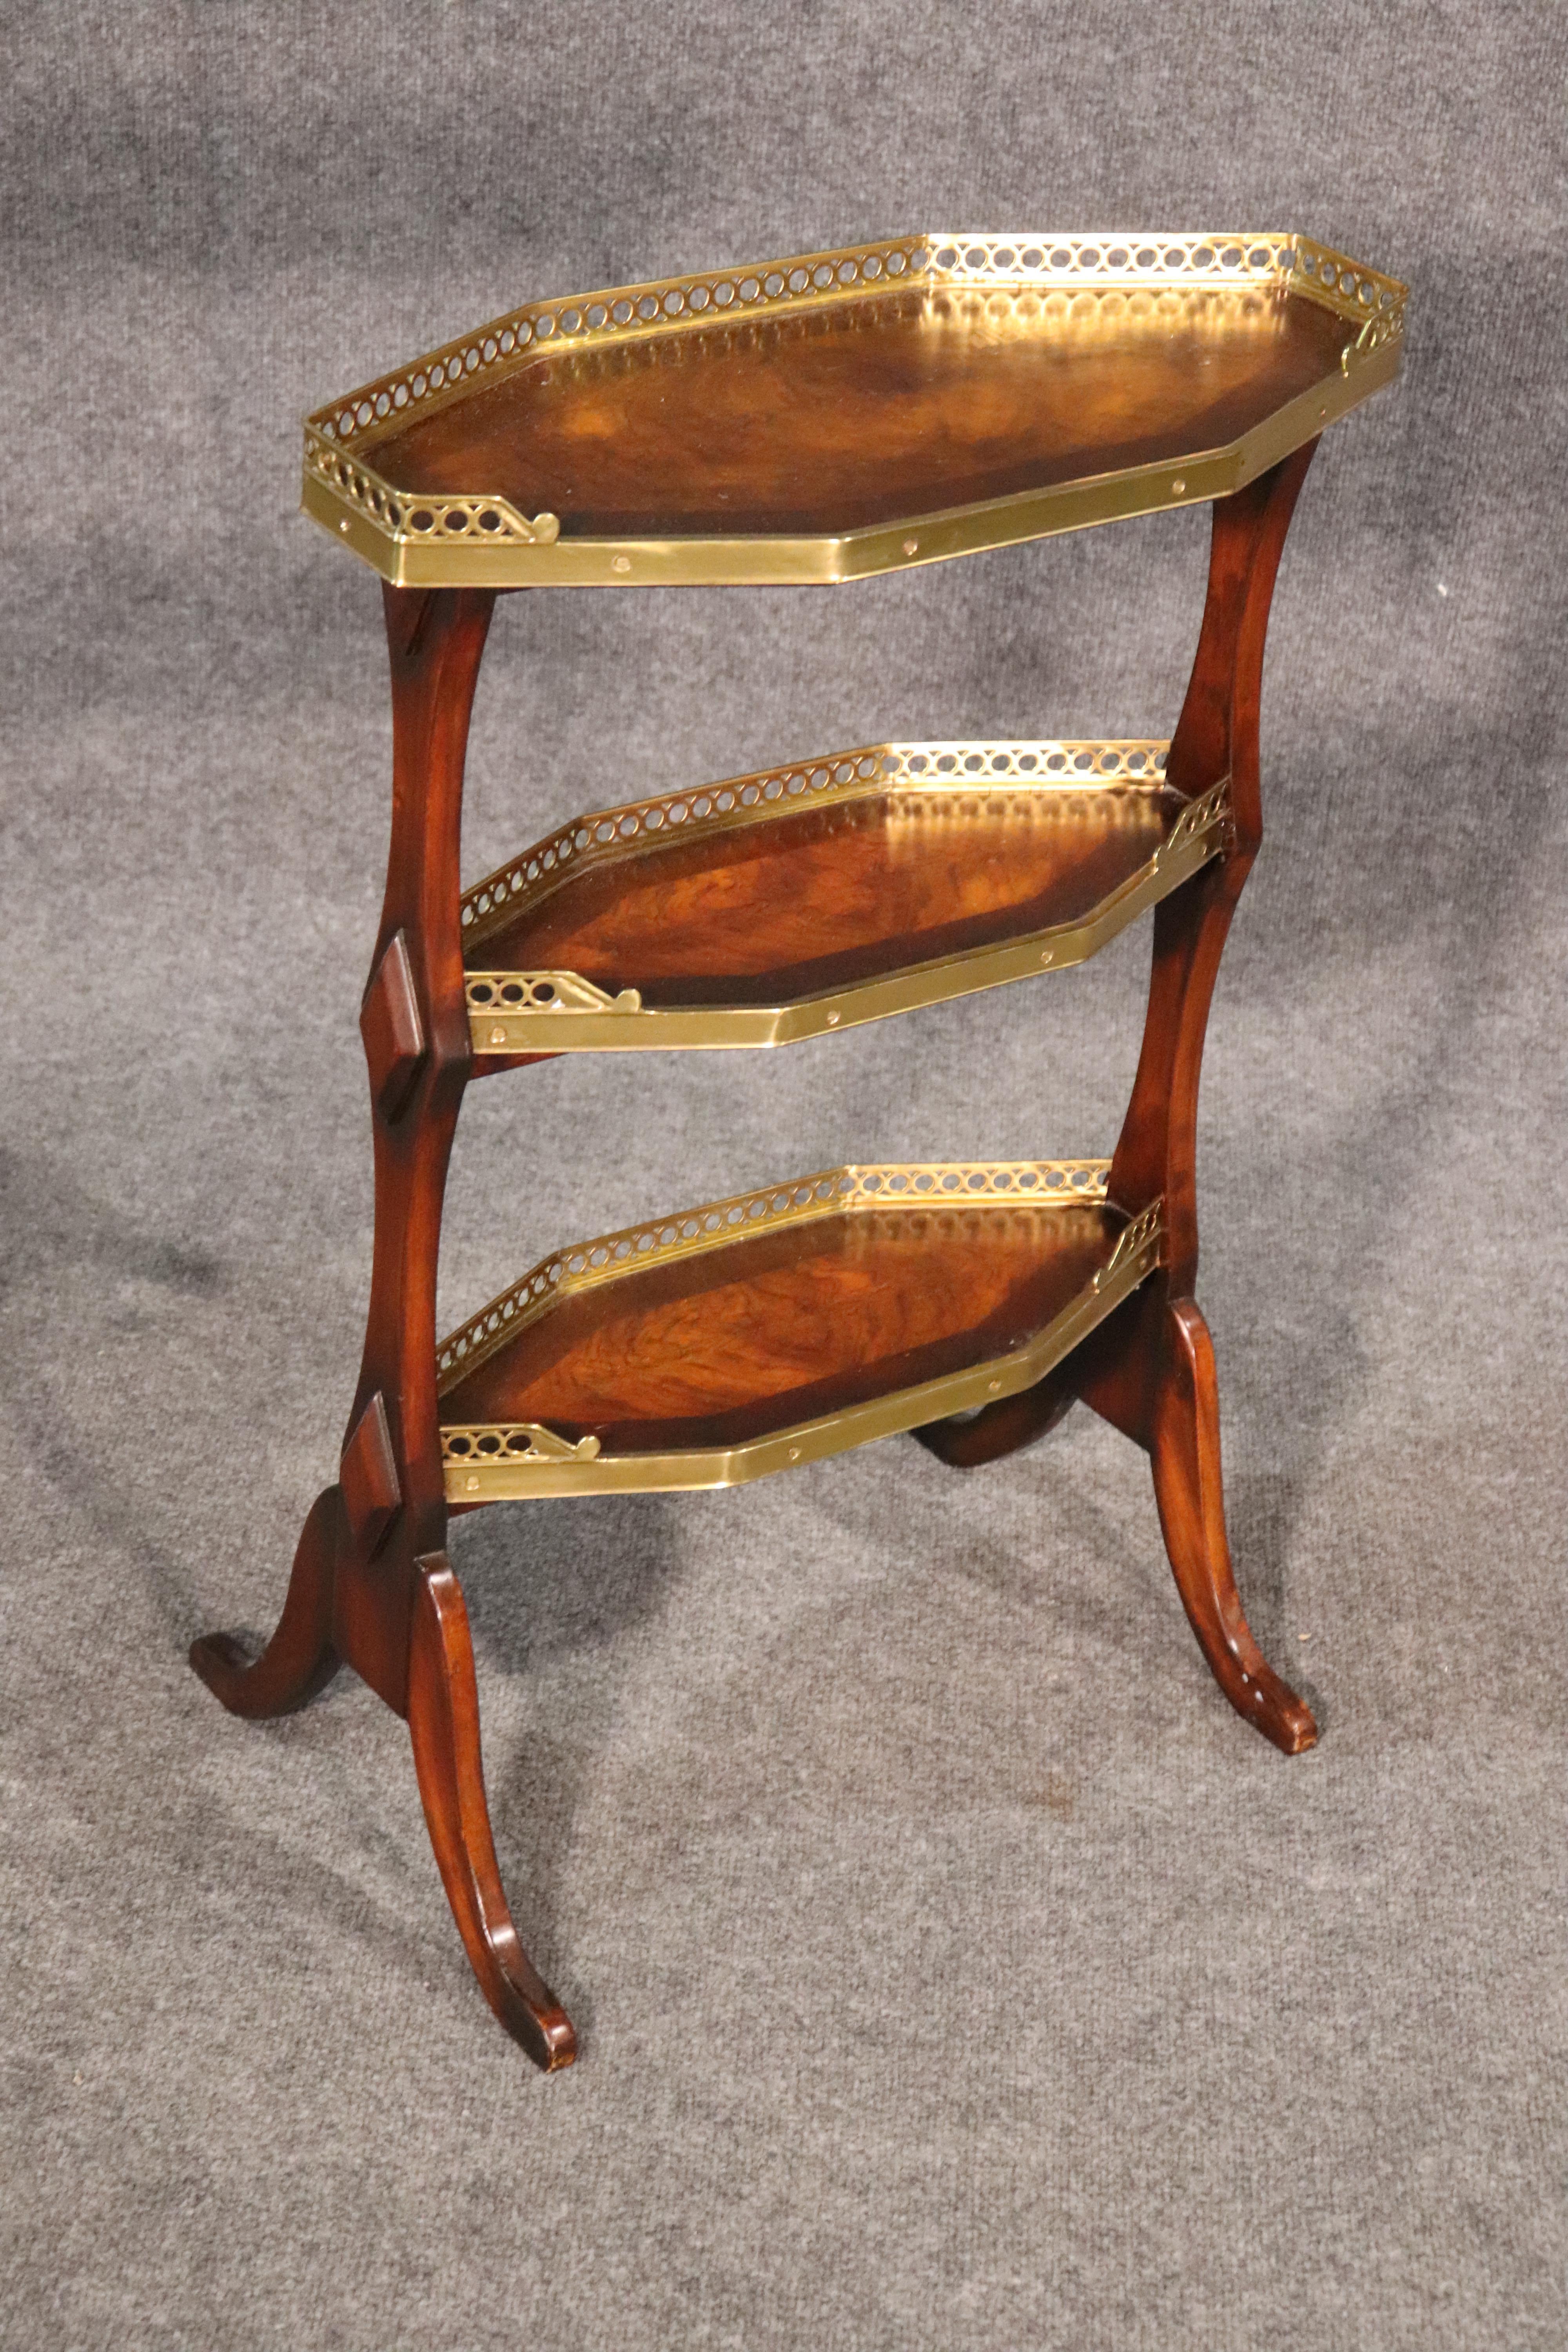 This is a high quality dessert stand or end table. The table is designed in the English Regency style and has gorgeous brass details and is solid and substantial. The stand appears to be of the quality of Baker or Charack but is not labeled.